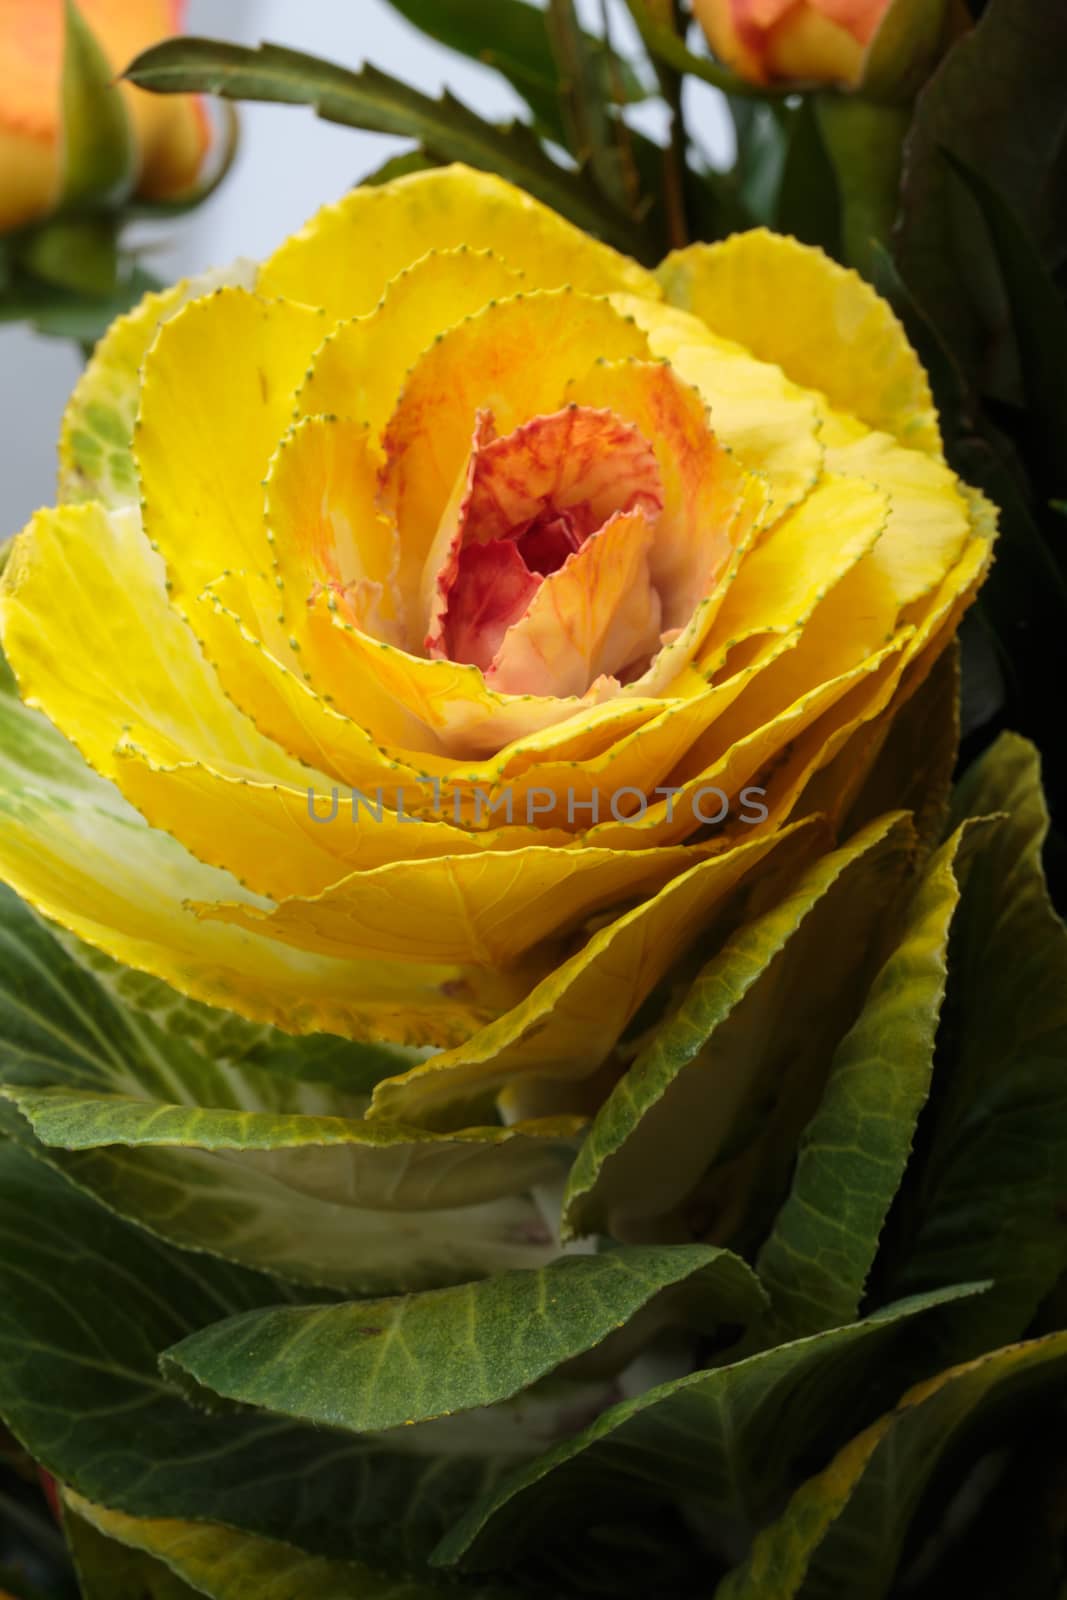 Ornamental kale with yellow, orange, and green leaves (Brassica oleracea) 